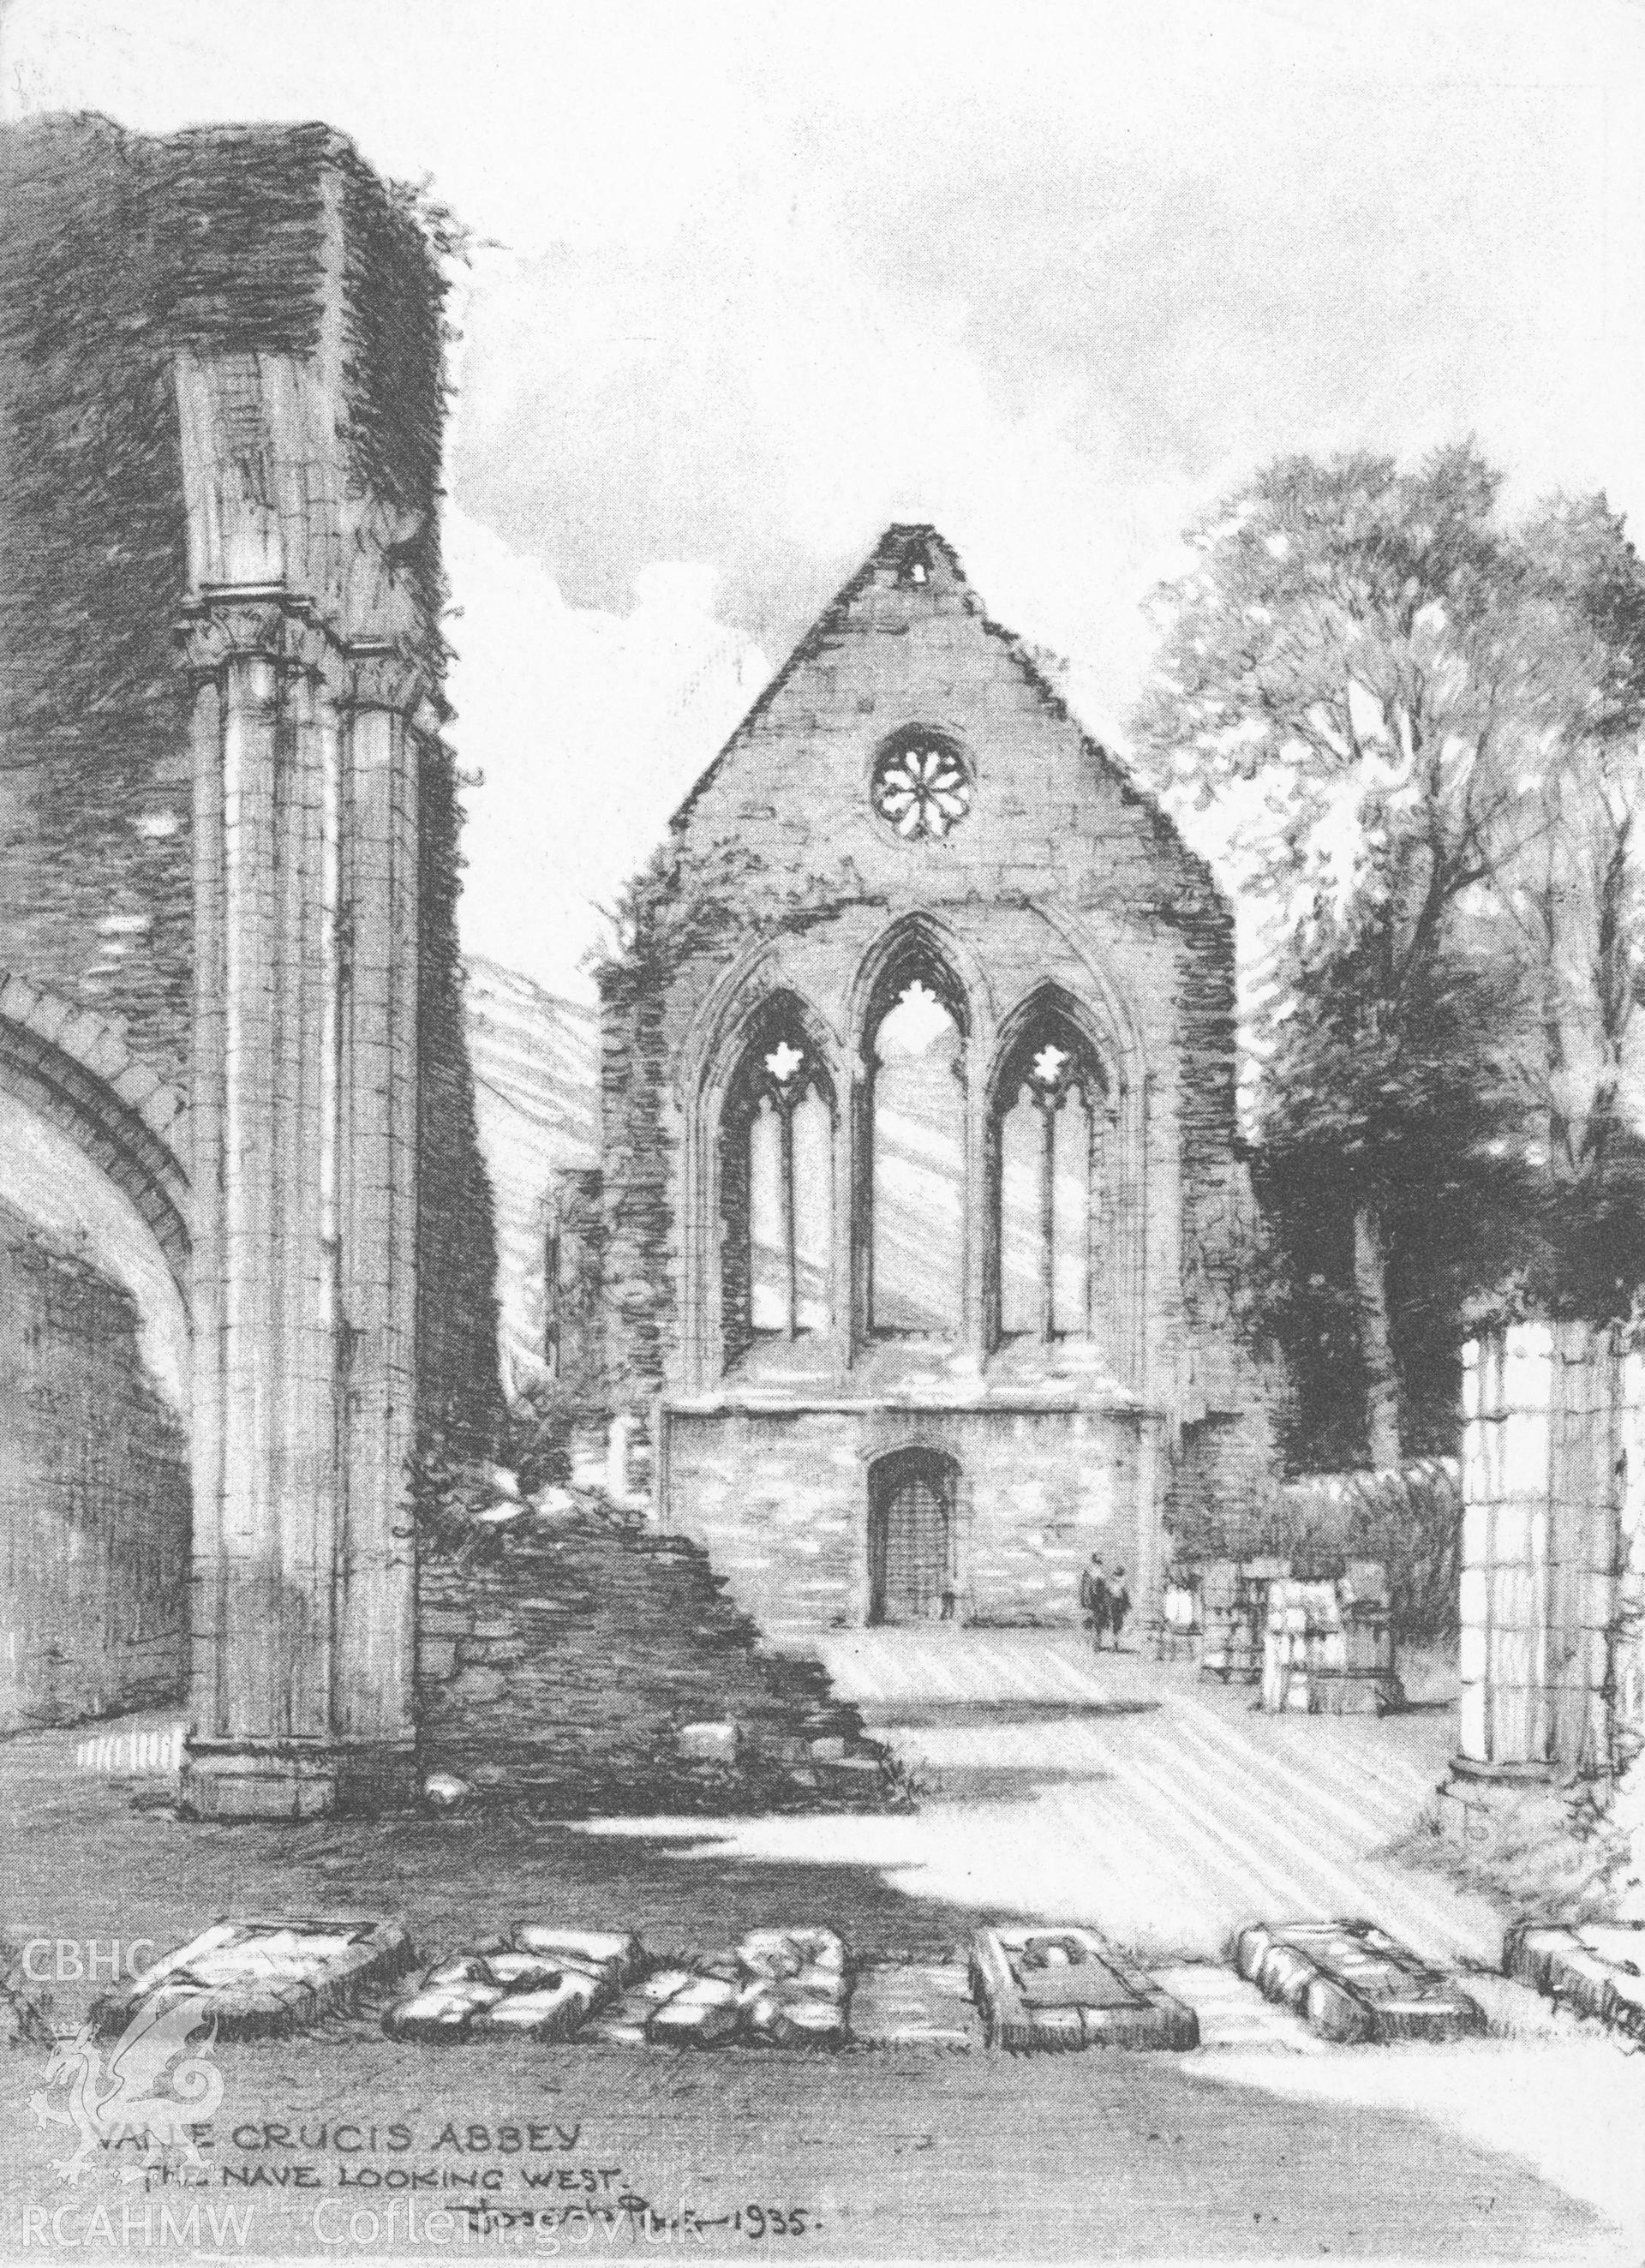 Digital copy of a black and white postcard showing Valle Crucis Abbey, the nave looking west, by Joseph Pike, 1935.